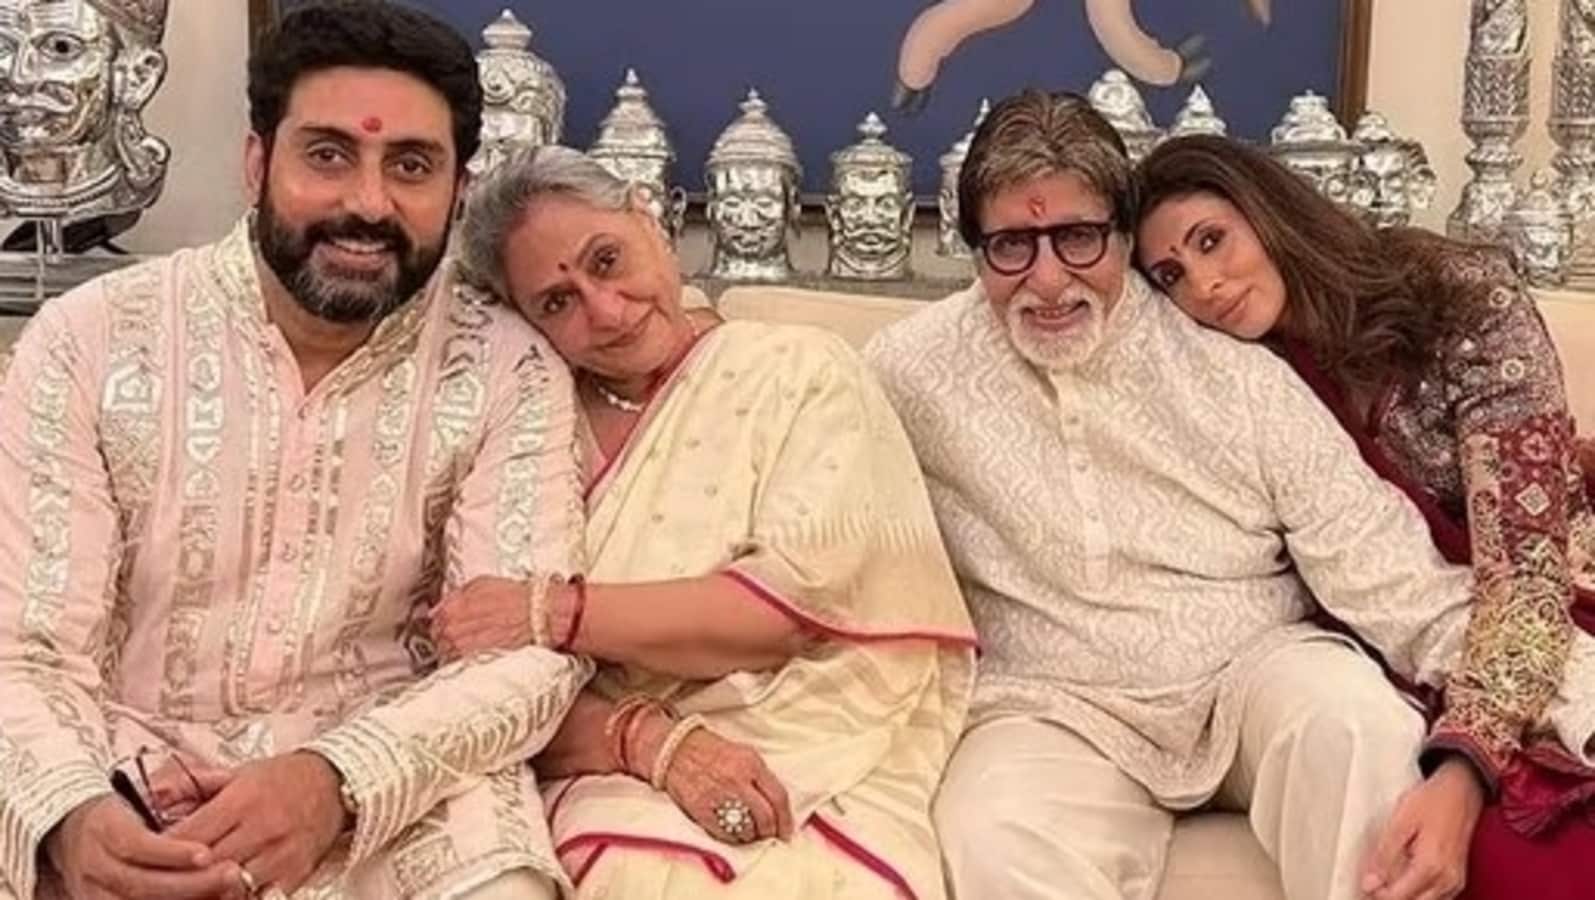 Jaya Bachchan admits she and Amitabh Bachchan were very protective of their kids: ‘We didn’t know any better’